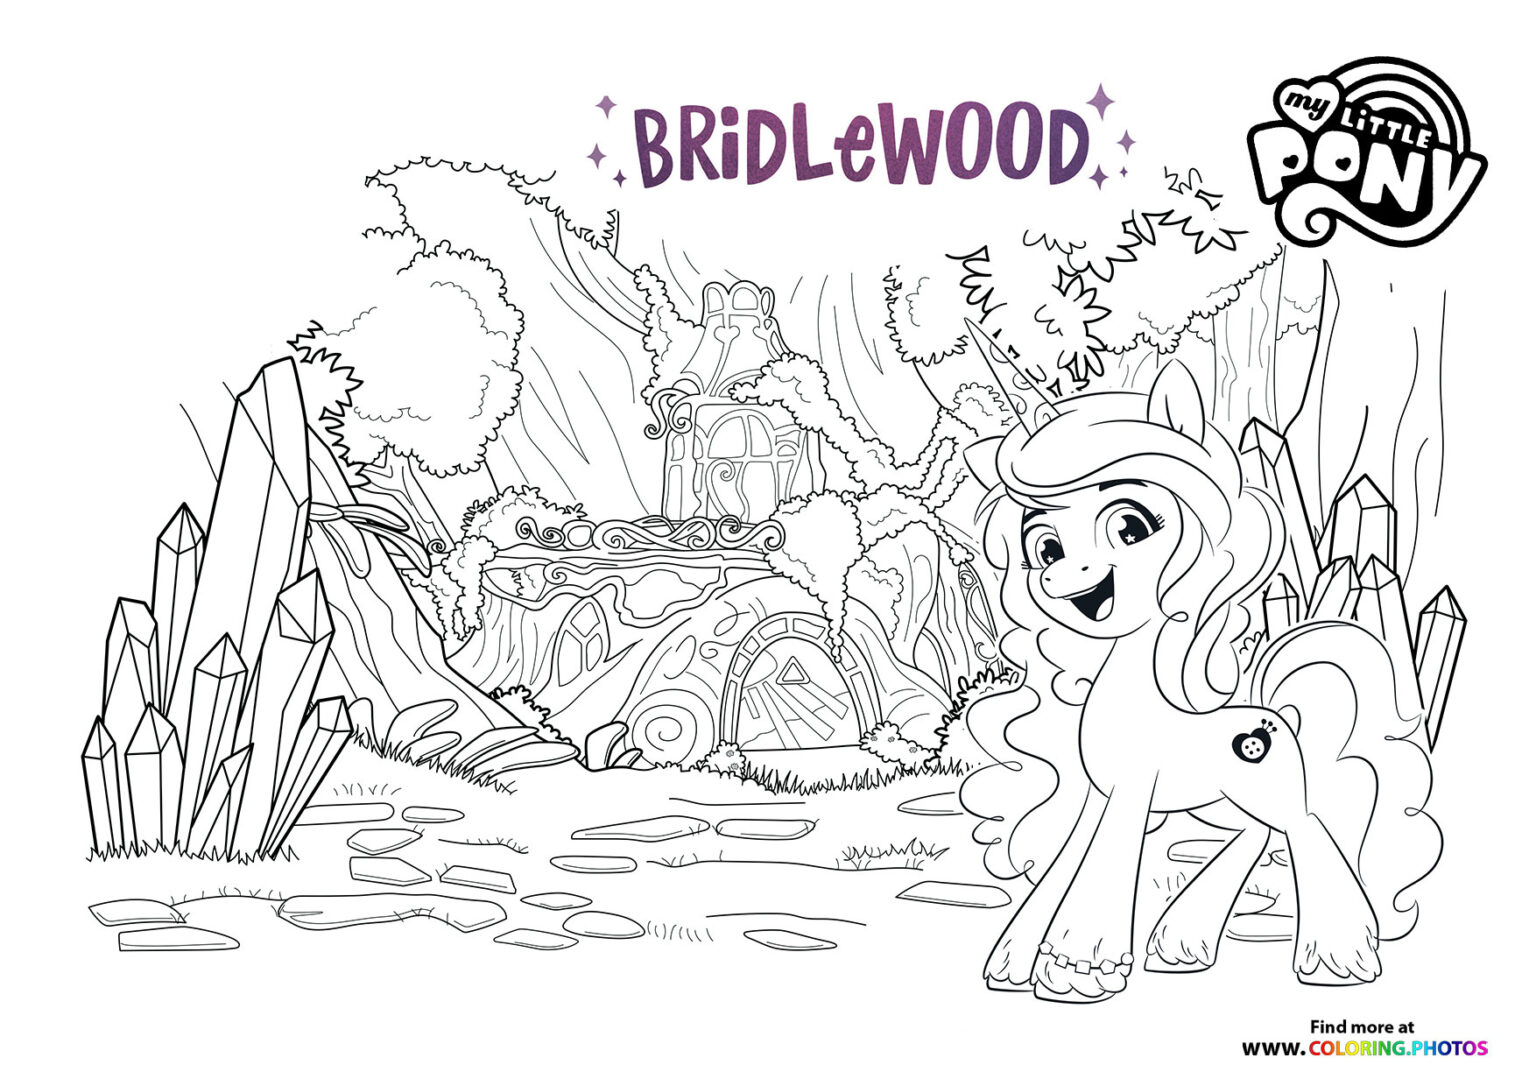 My Little Pony   A New Generation coloring pages for kids   Print for free